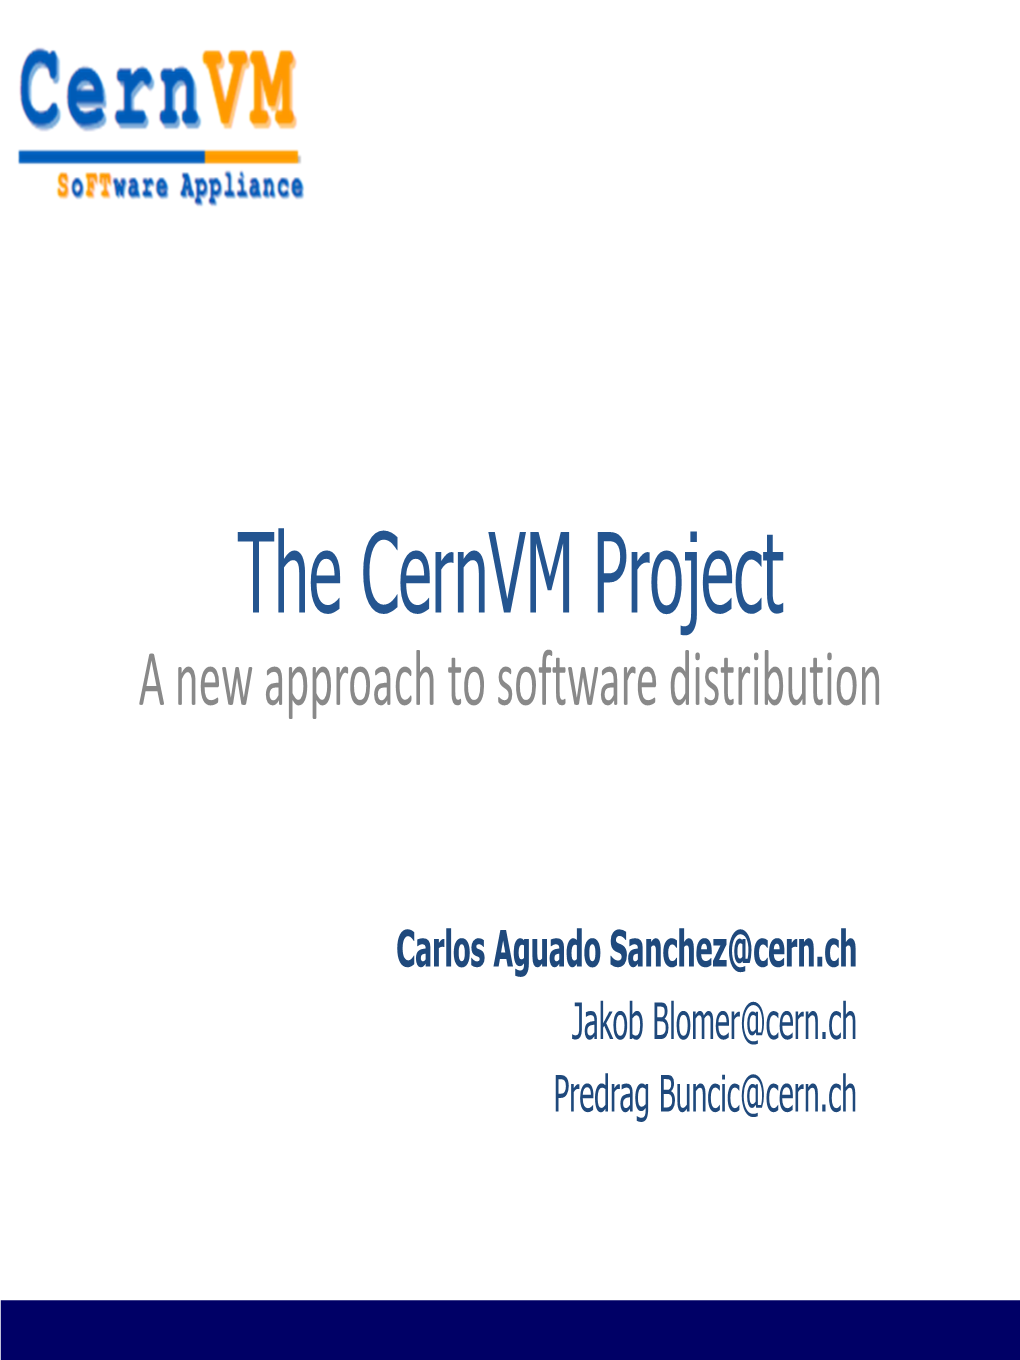 The Cernvm Project a New Approach to Software Distribution